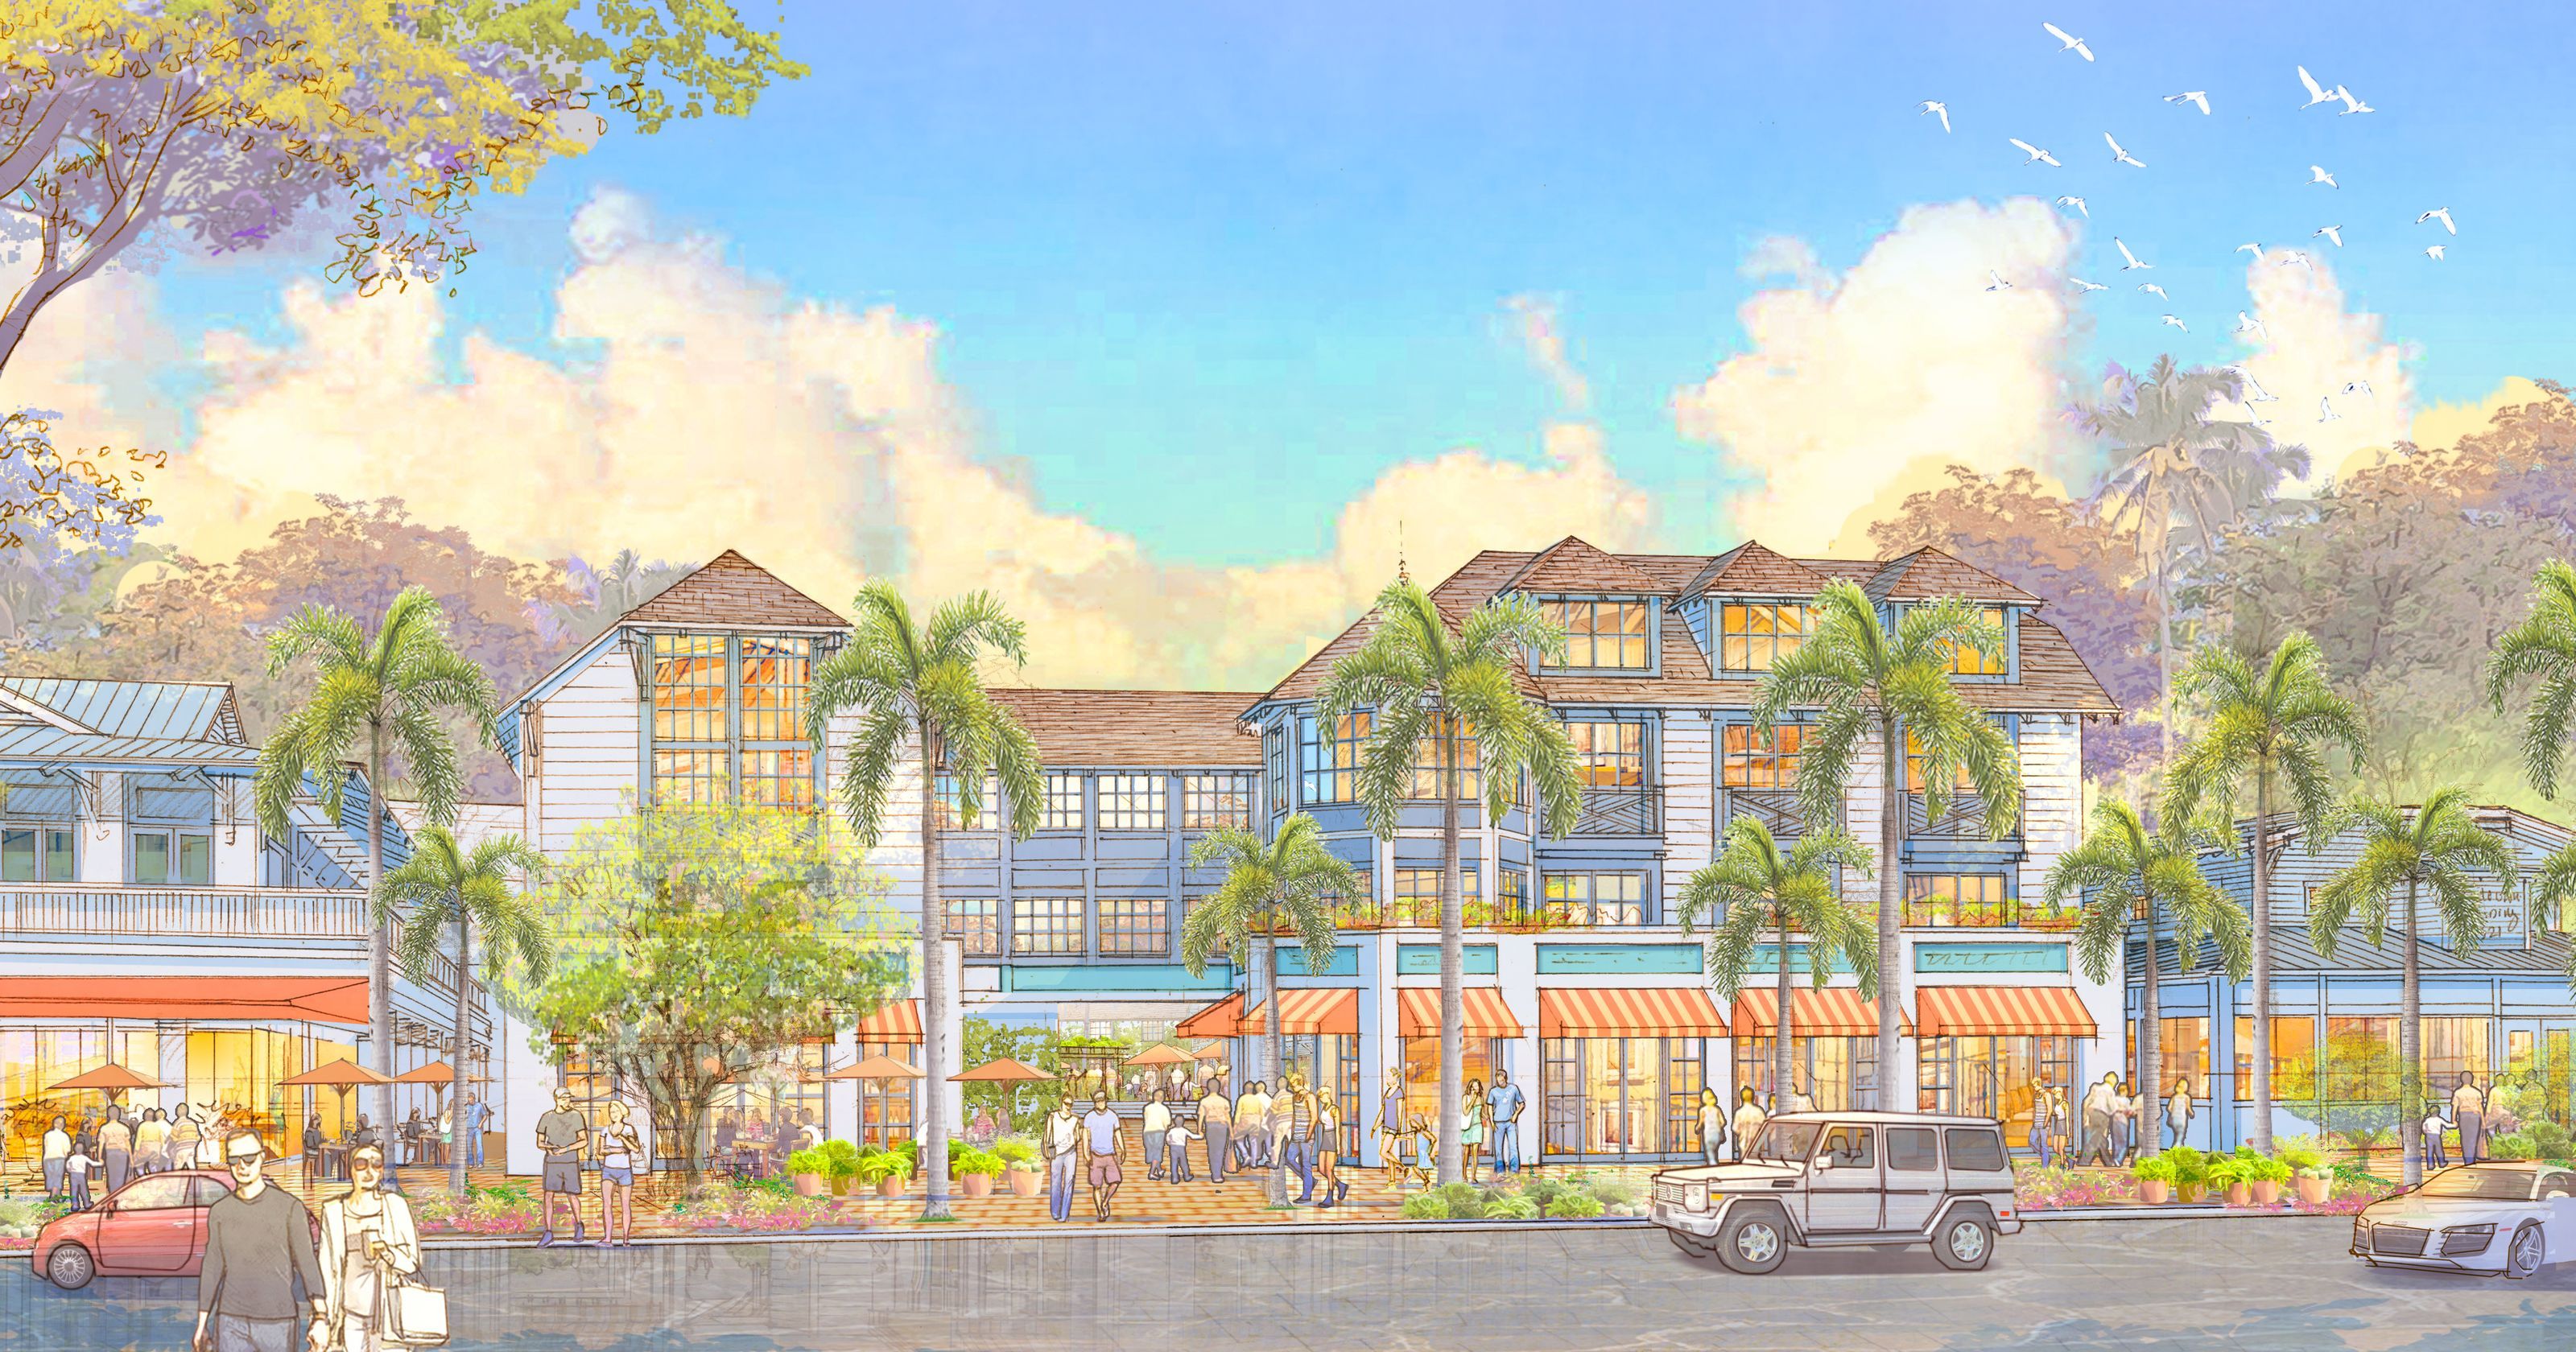 109-room Old Naples Hotel gets city planning board's approval